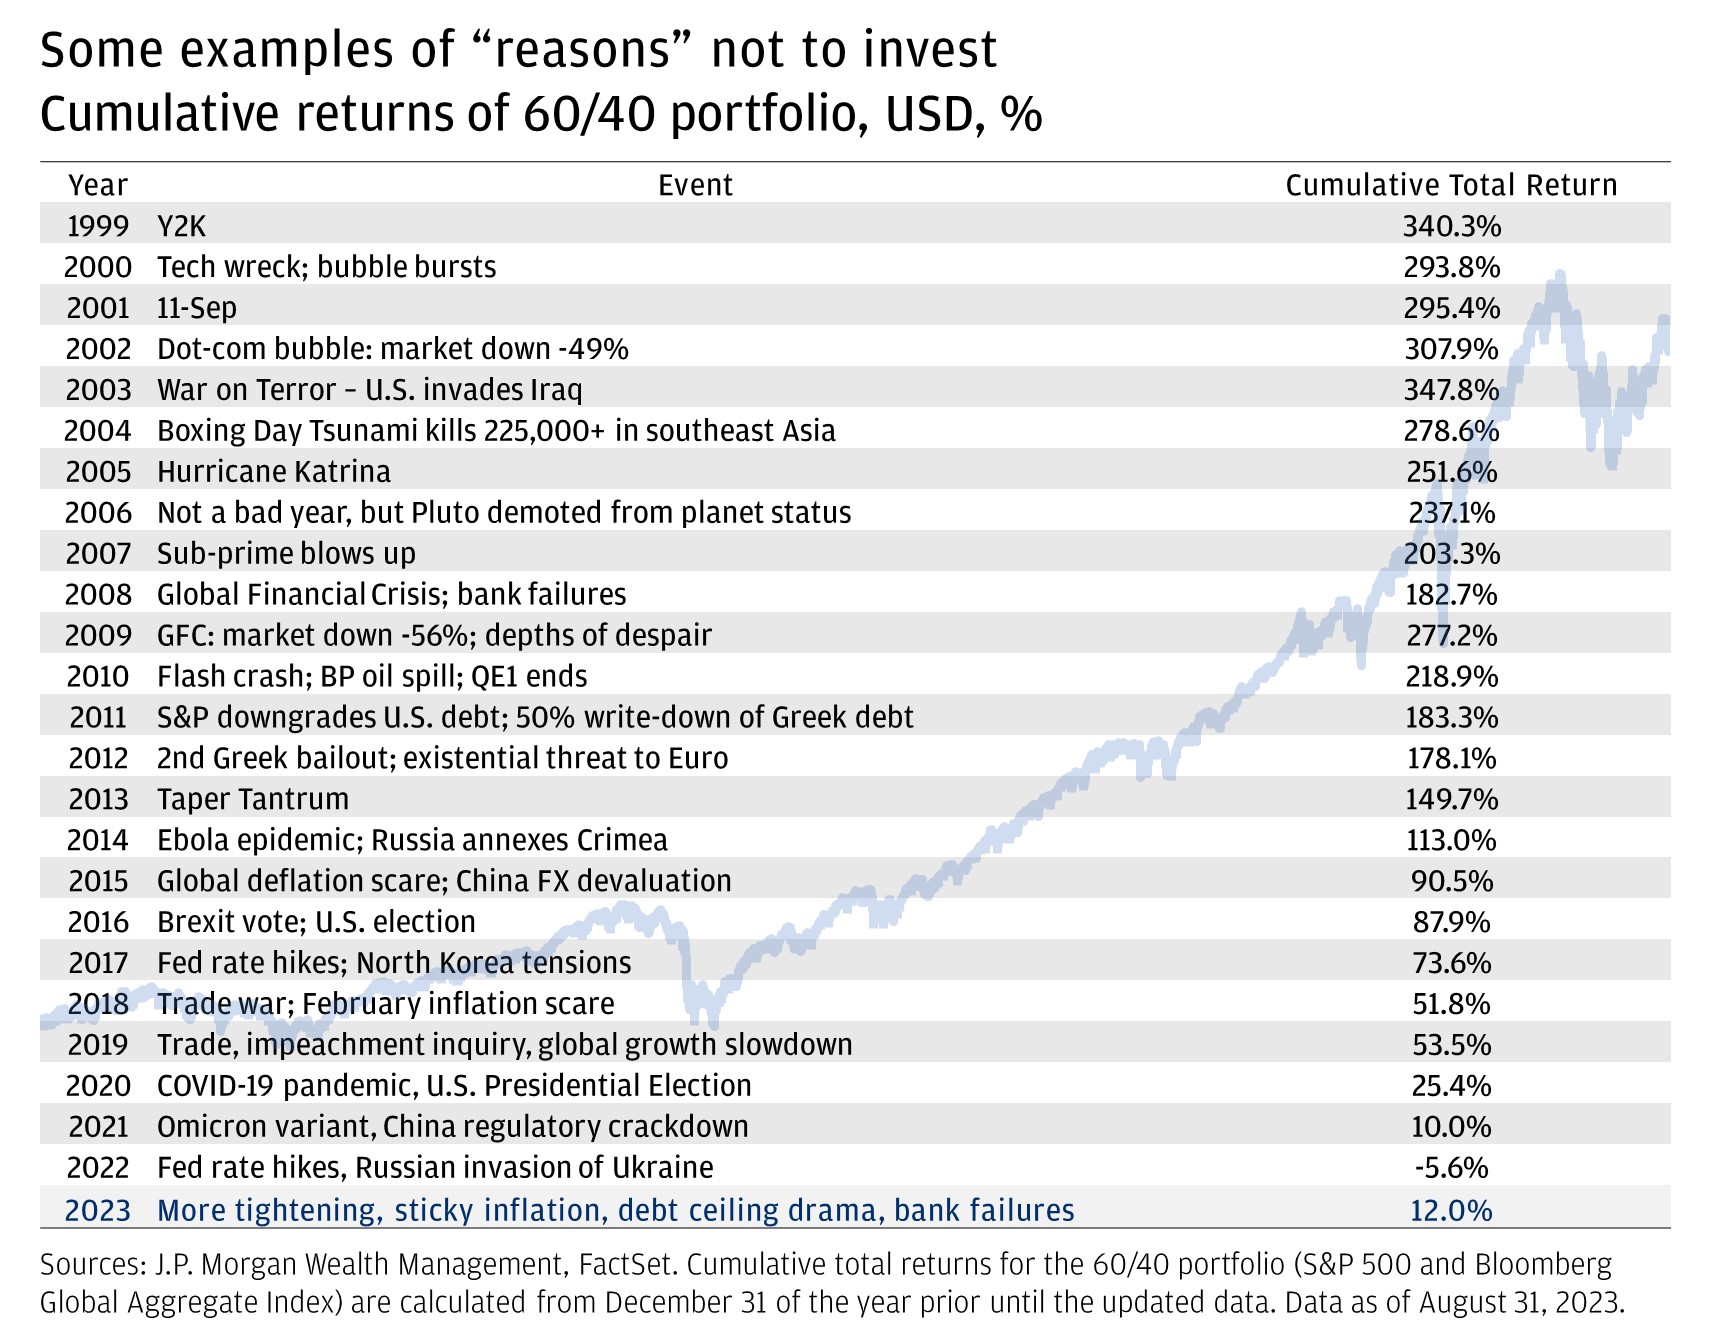 The chart describes the examples of “reasons” not to invest. It describes the cumulative returns of a 60/40 portfolio since a series of events (from 1999 to now).